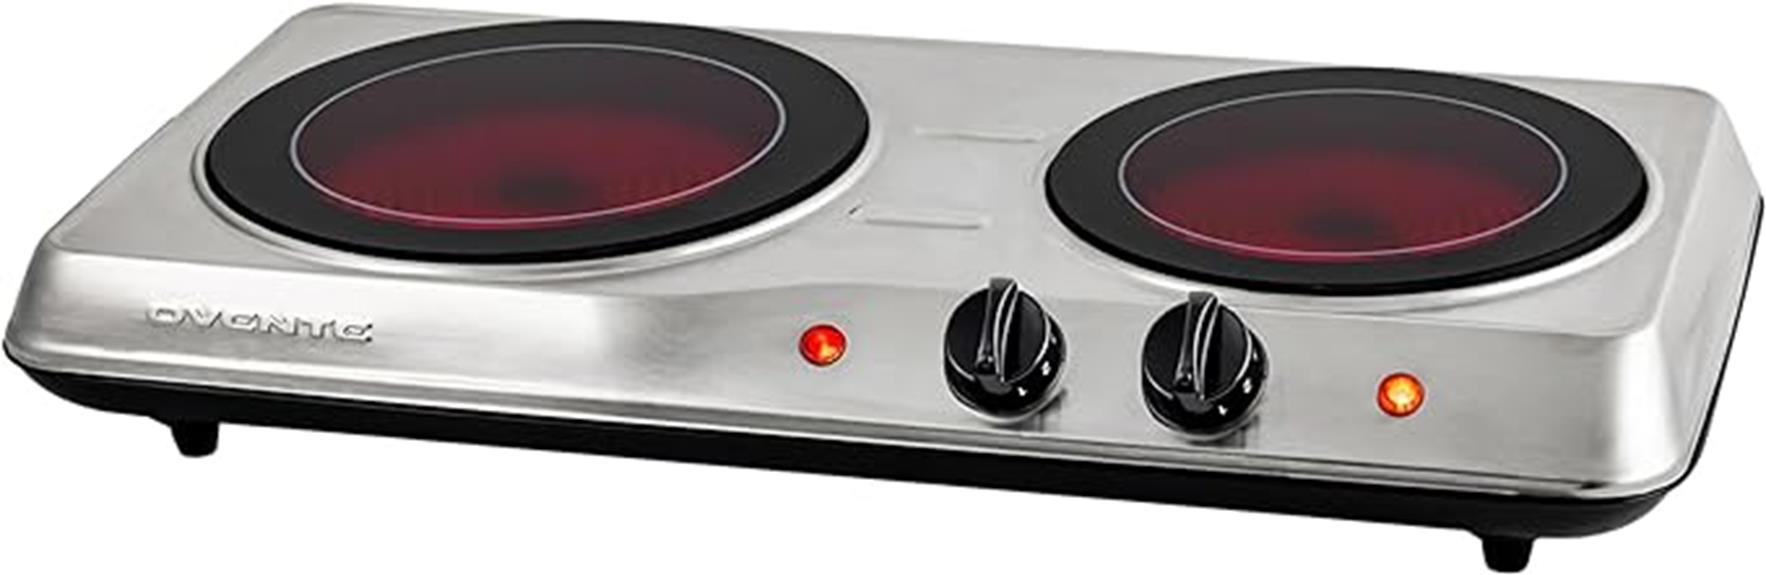 infrared double burner stove